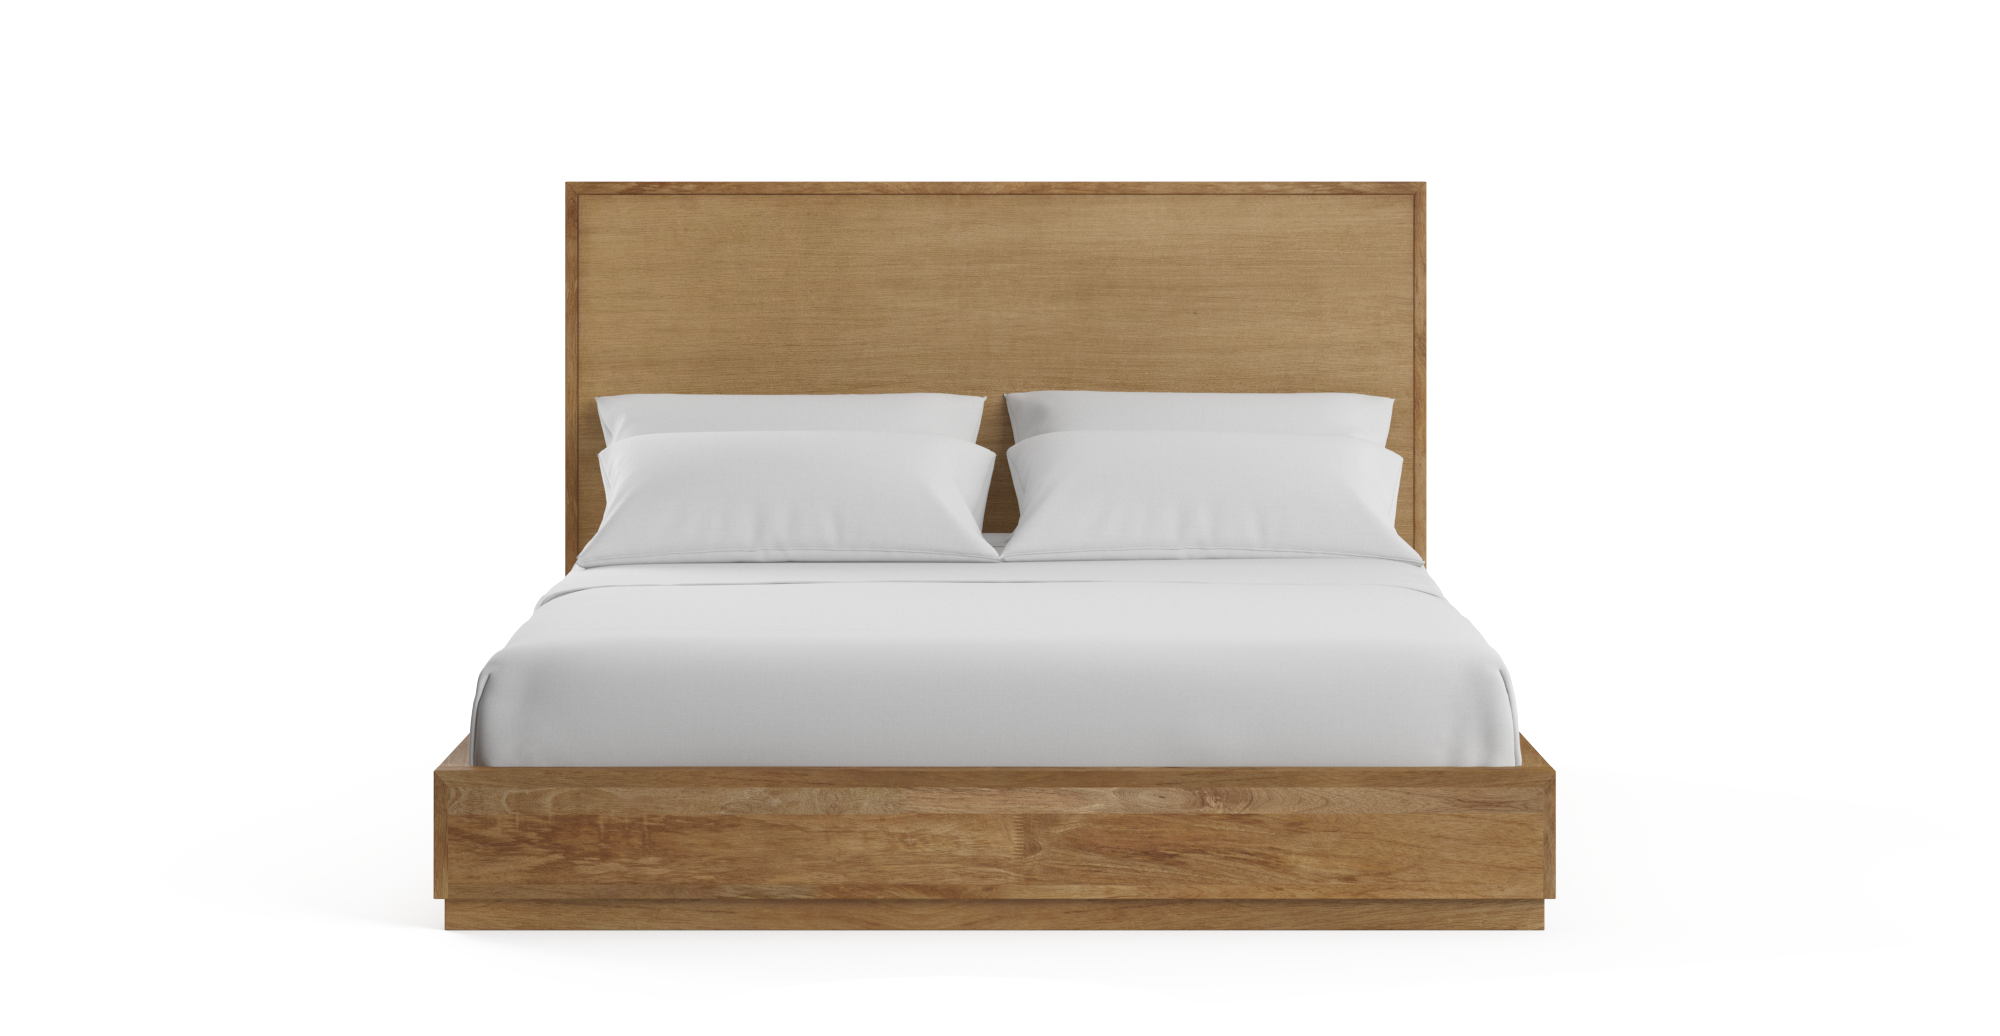 Buy Beds & Bed Frames | King, Queen, Double, Single